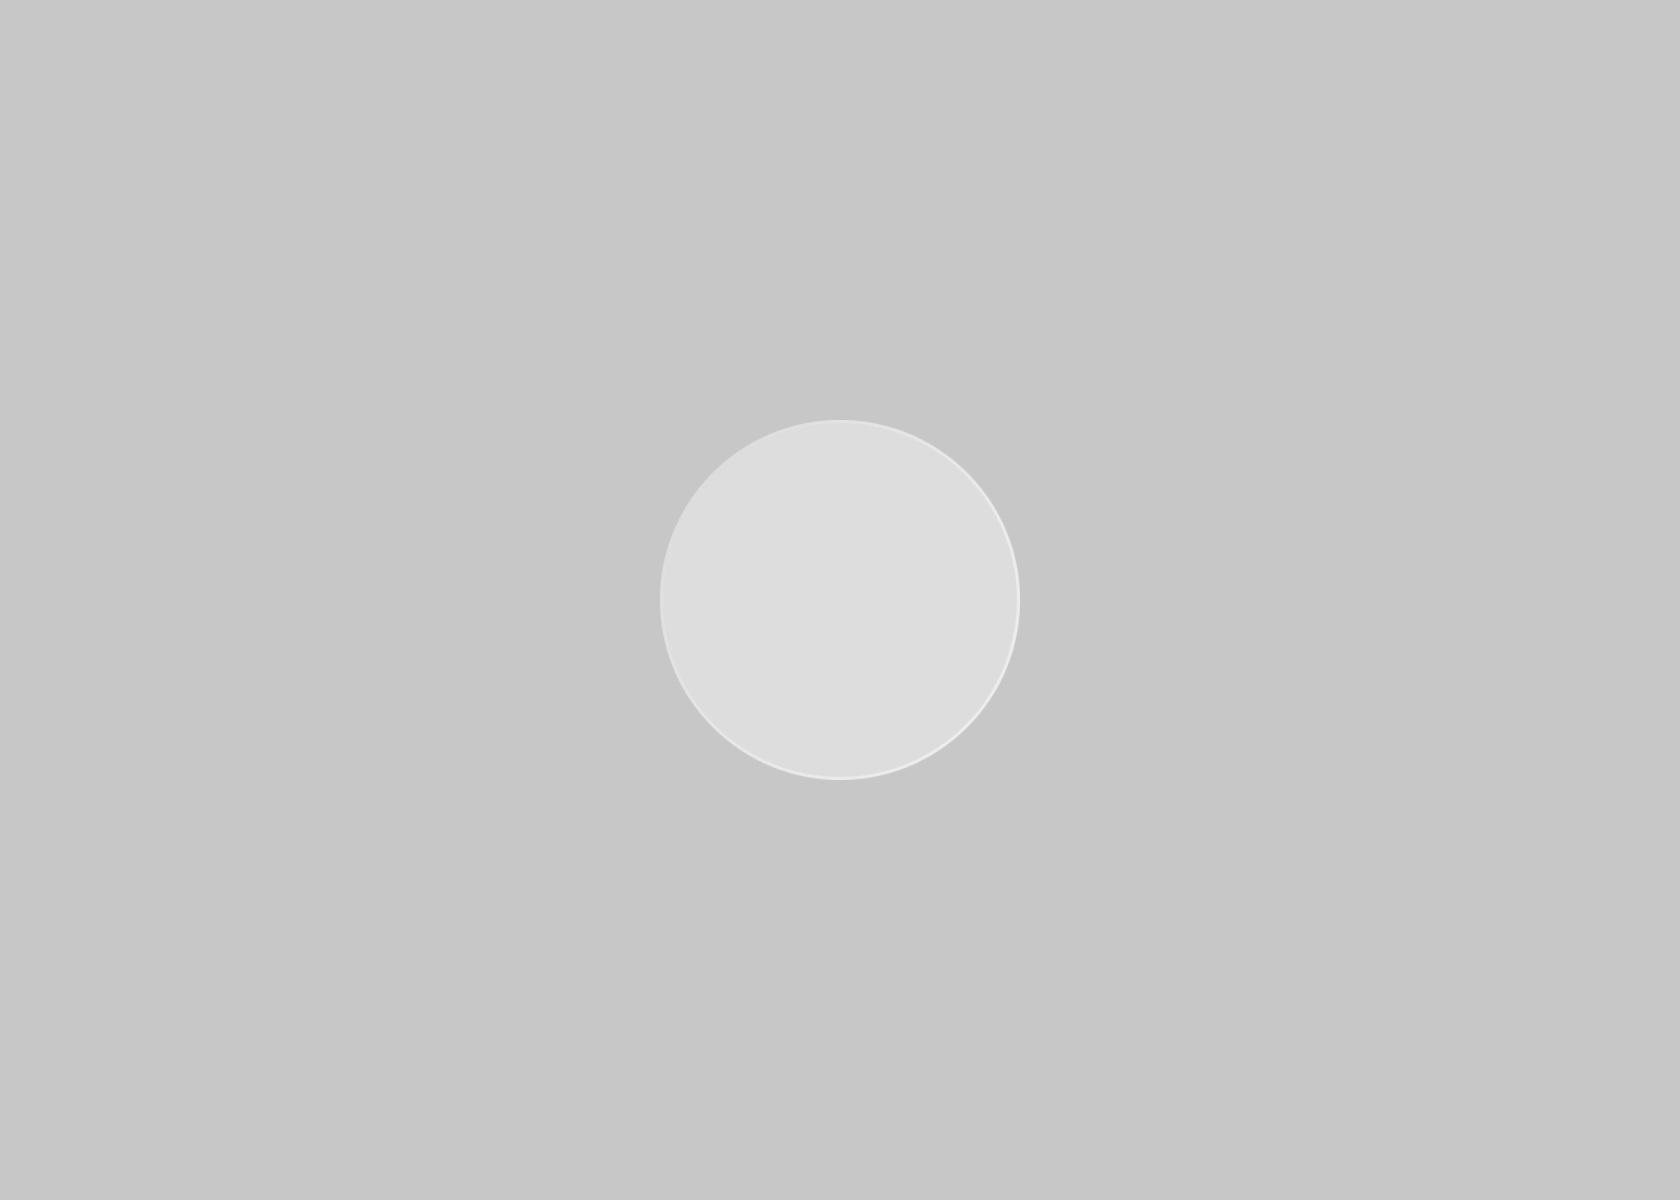 A white circle object fades in with scaling up, then fades out with scaling down.